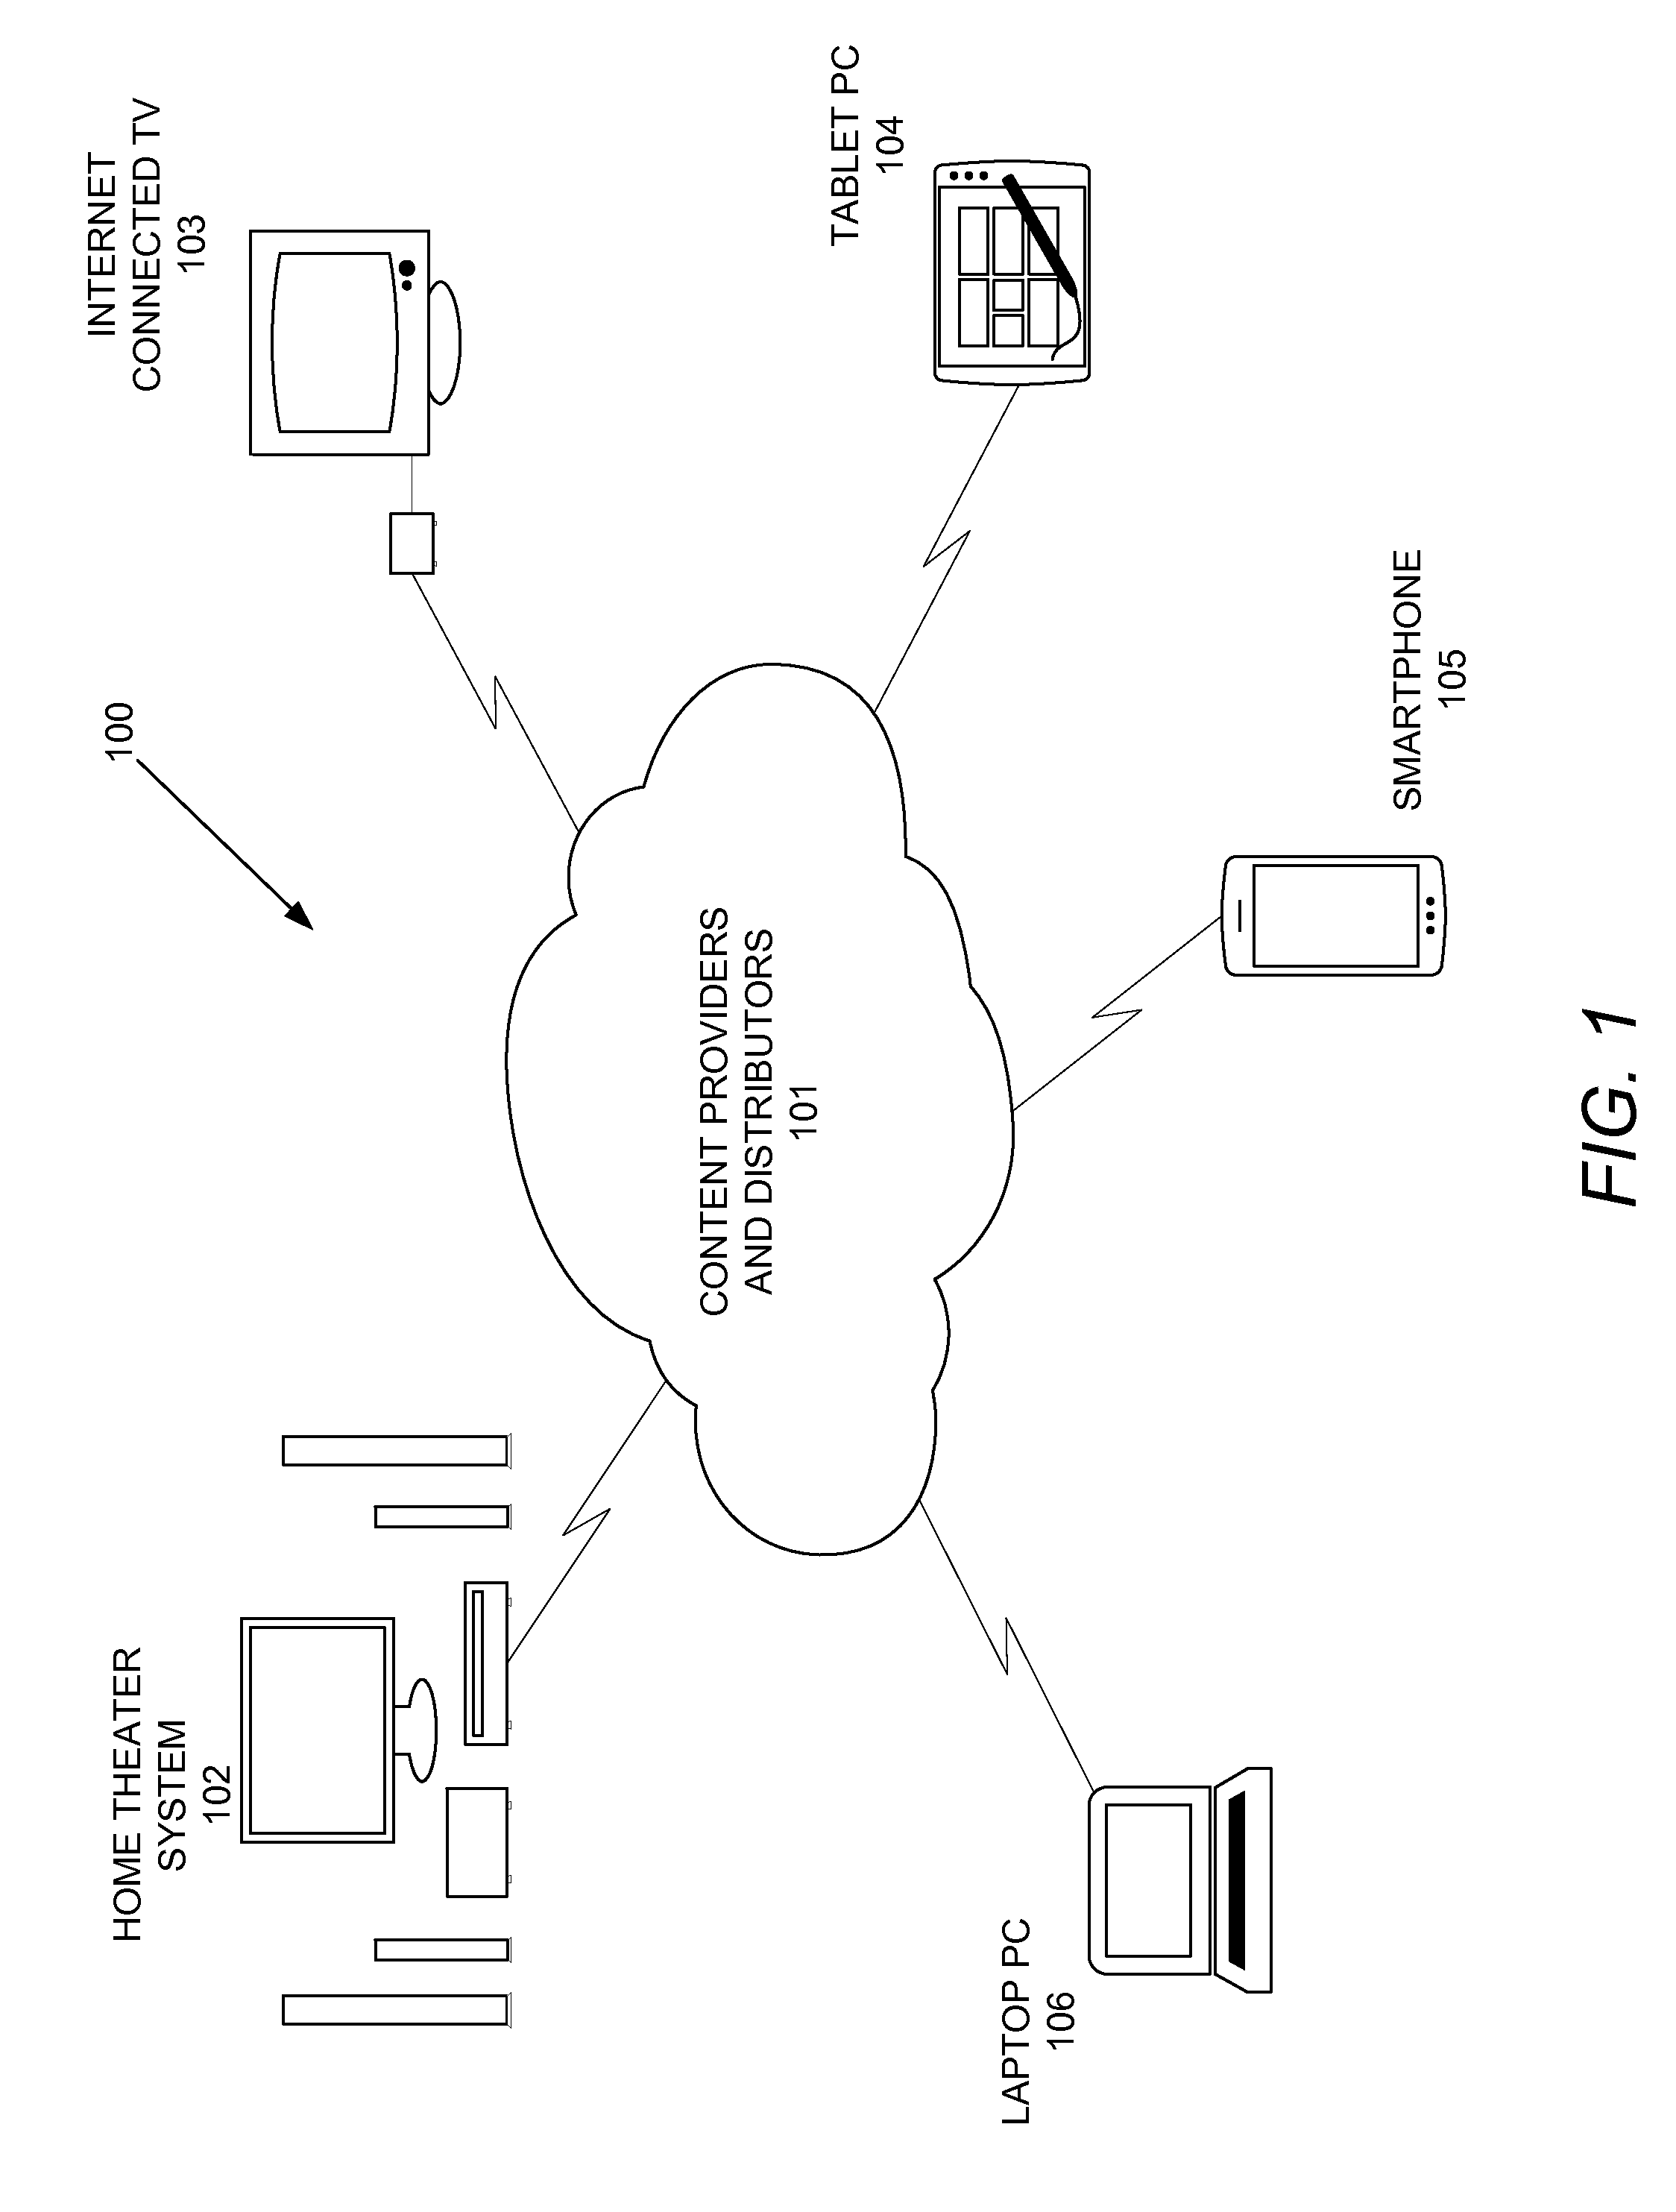 Method and apparatus for layered compression of multimedia signals for storage and transmission over heterogeneous networks